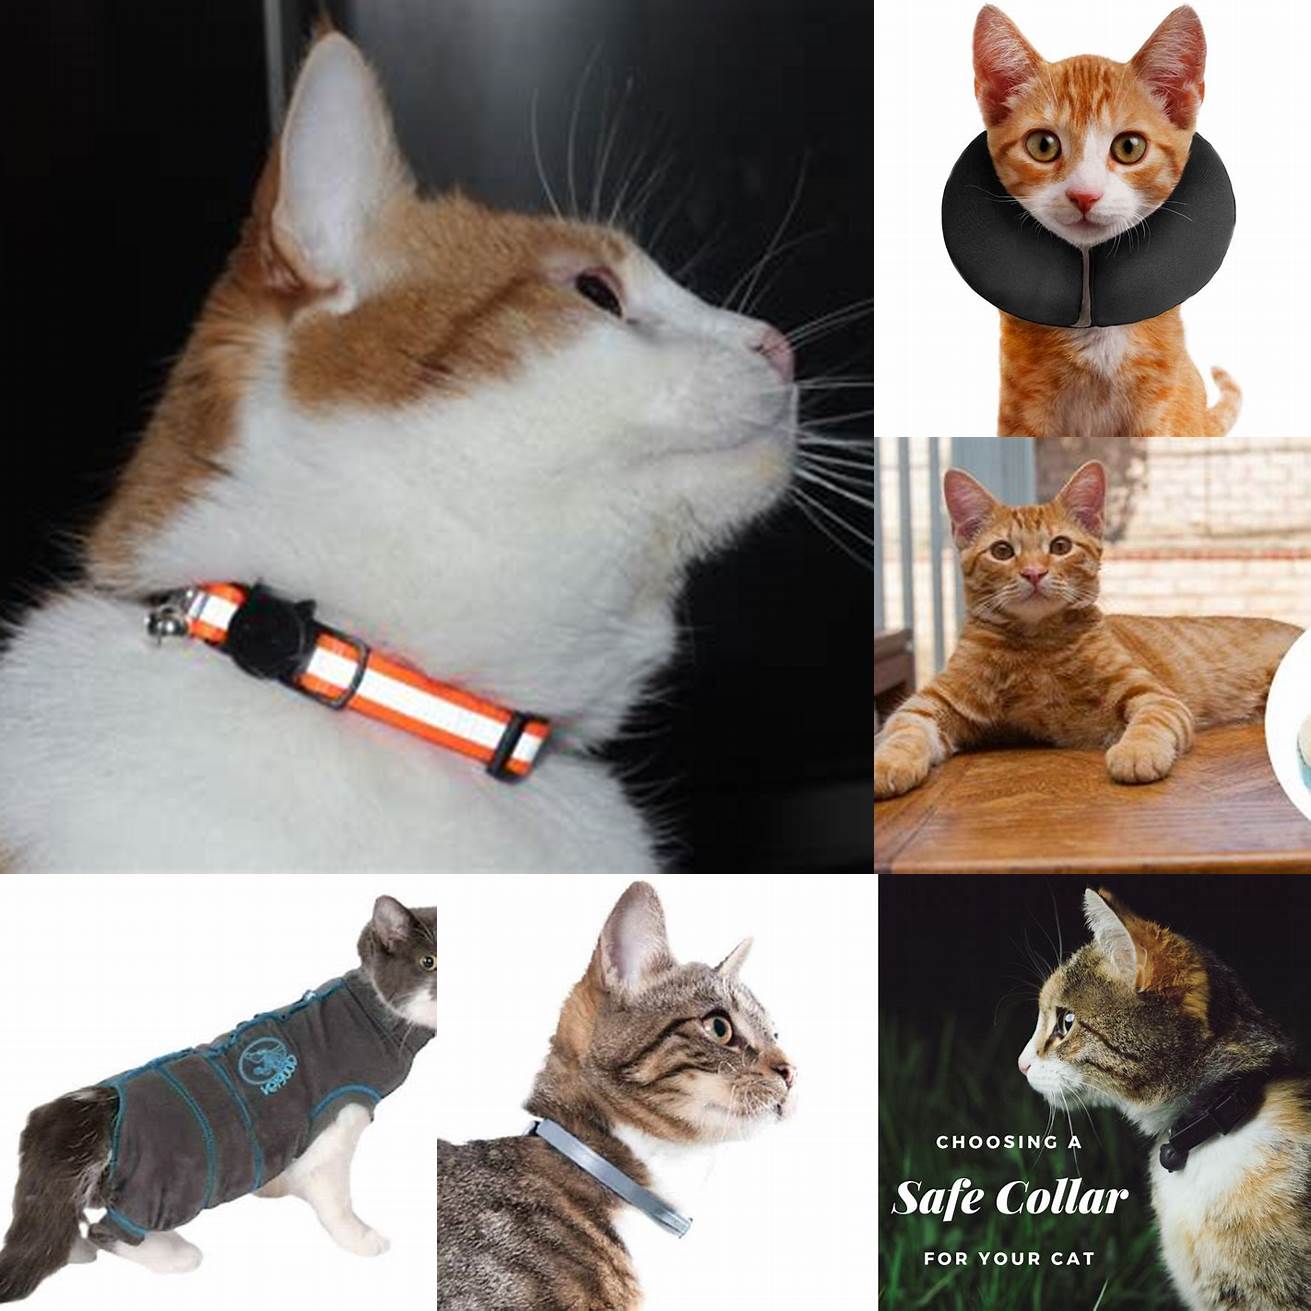 Avoid tight clothing or collars on your cat